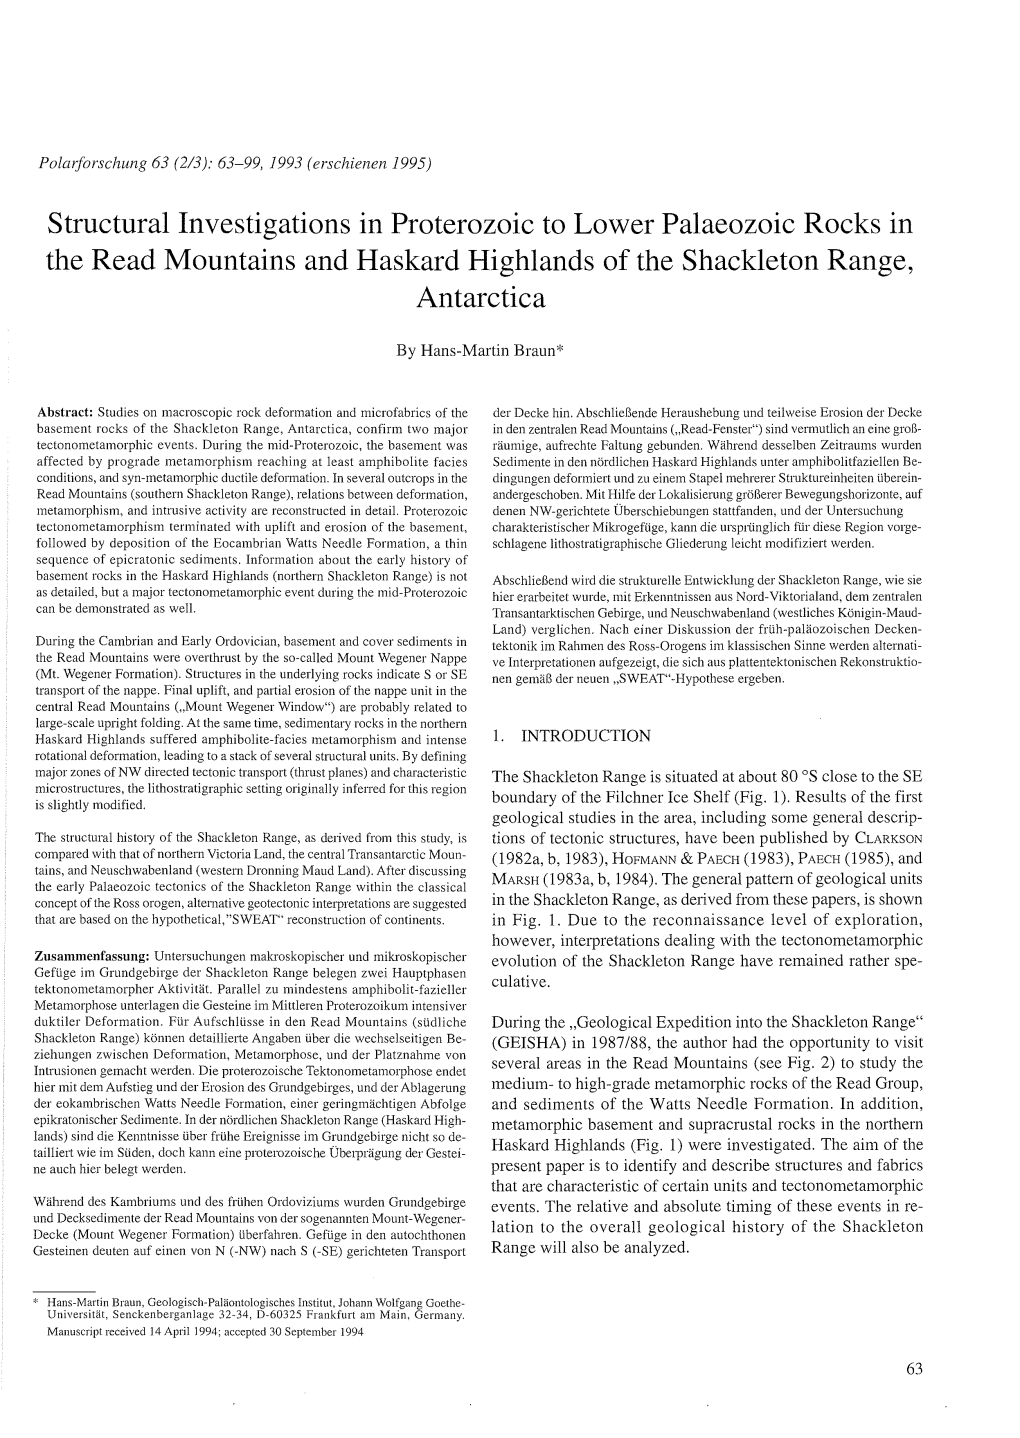 Structural Investigations in Proterozoic to Lower Palaeozoic Rocks in the Read Mountains and Haskard Highlands of the Shackleton Range, Antarctica